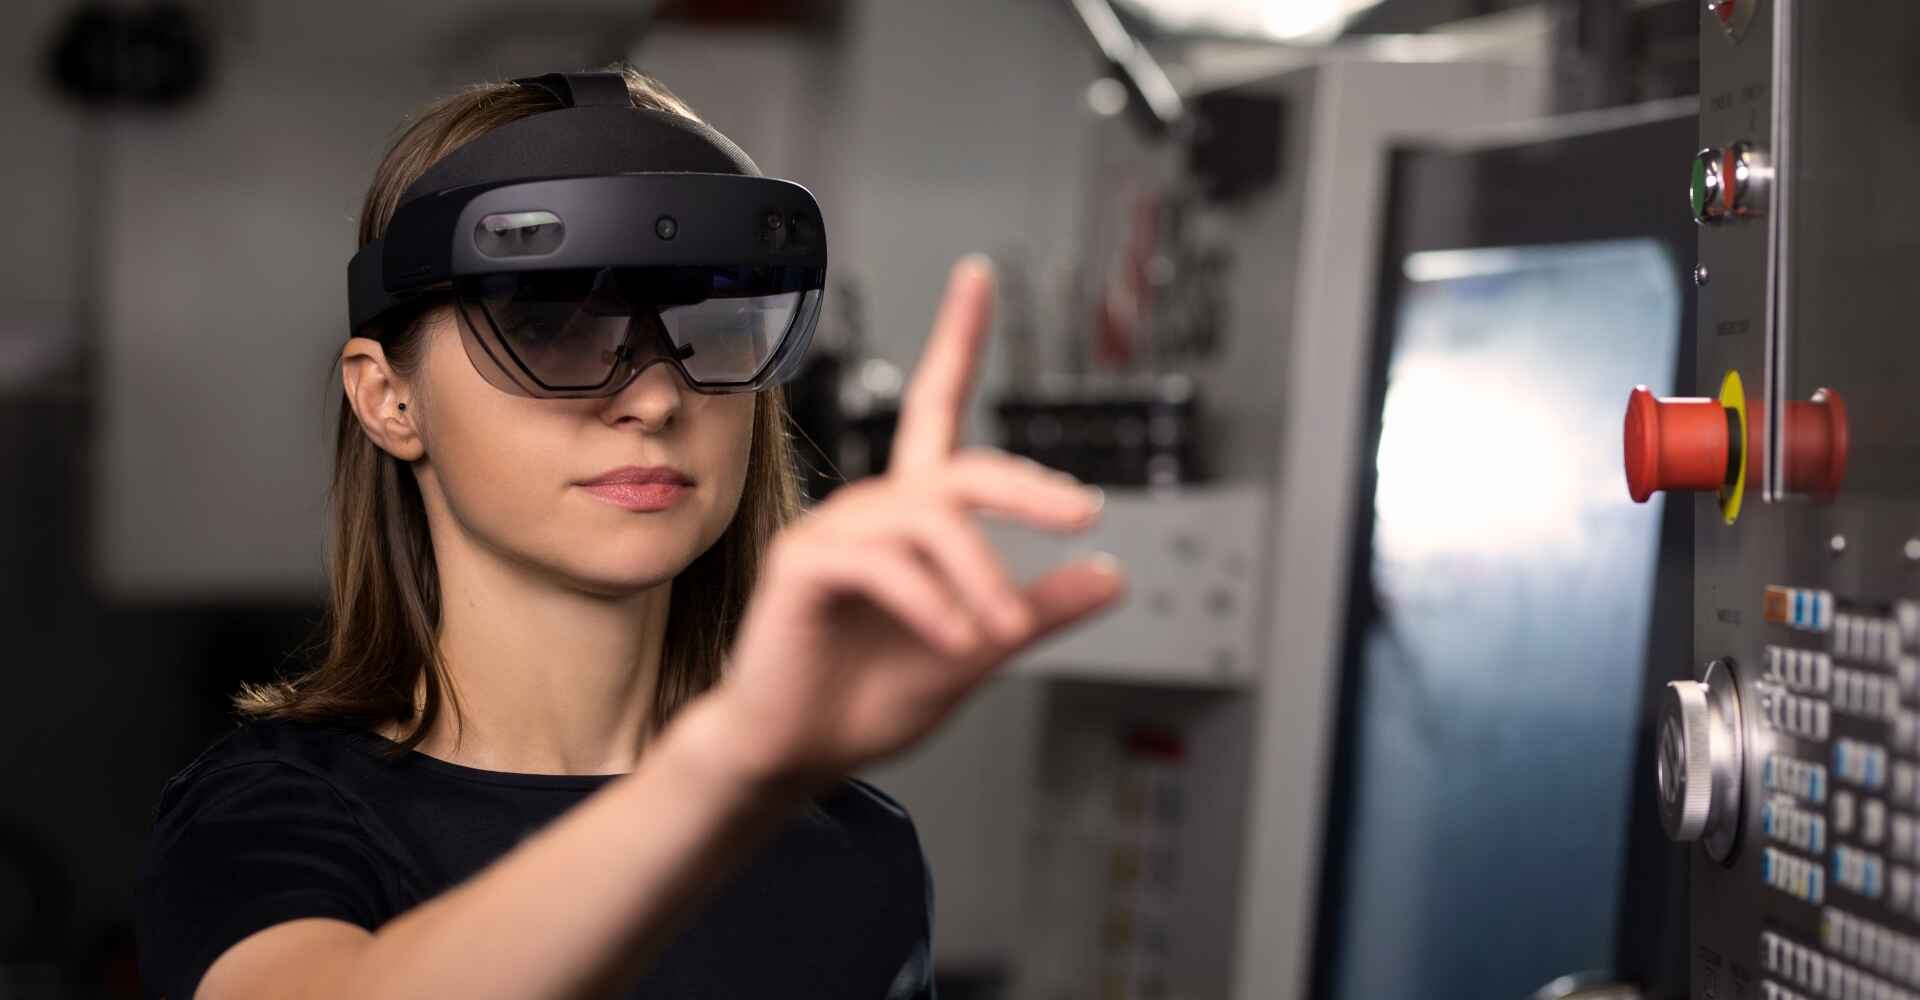 How To Get Free HoloLens